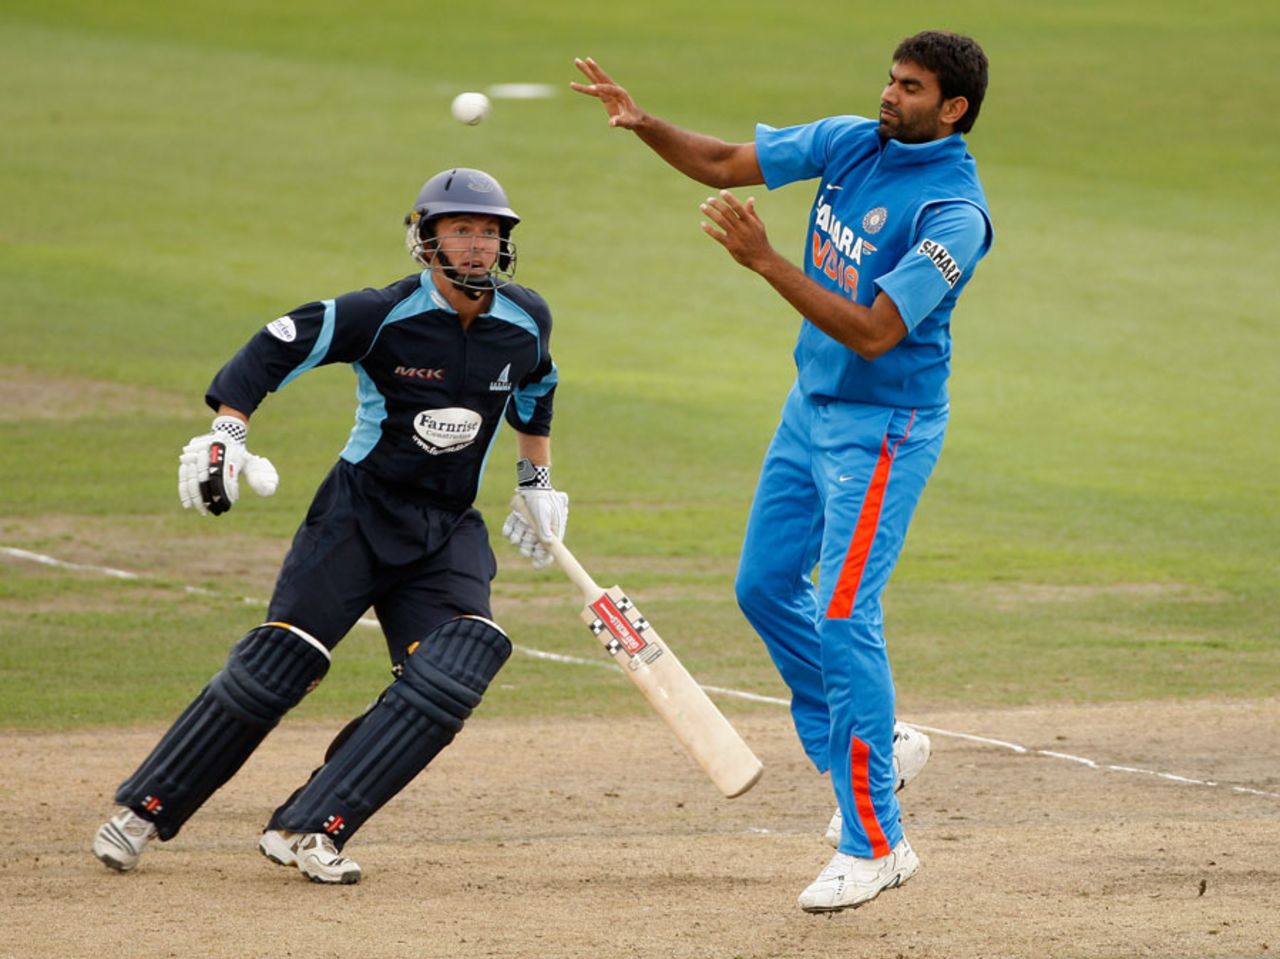 Munaf Patel tries to field off his bowling as Chris Nash looks on, Sussex v Indians, Tour match, Hove, August 25, 2011